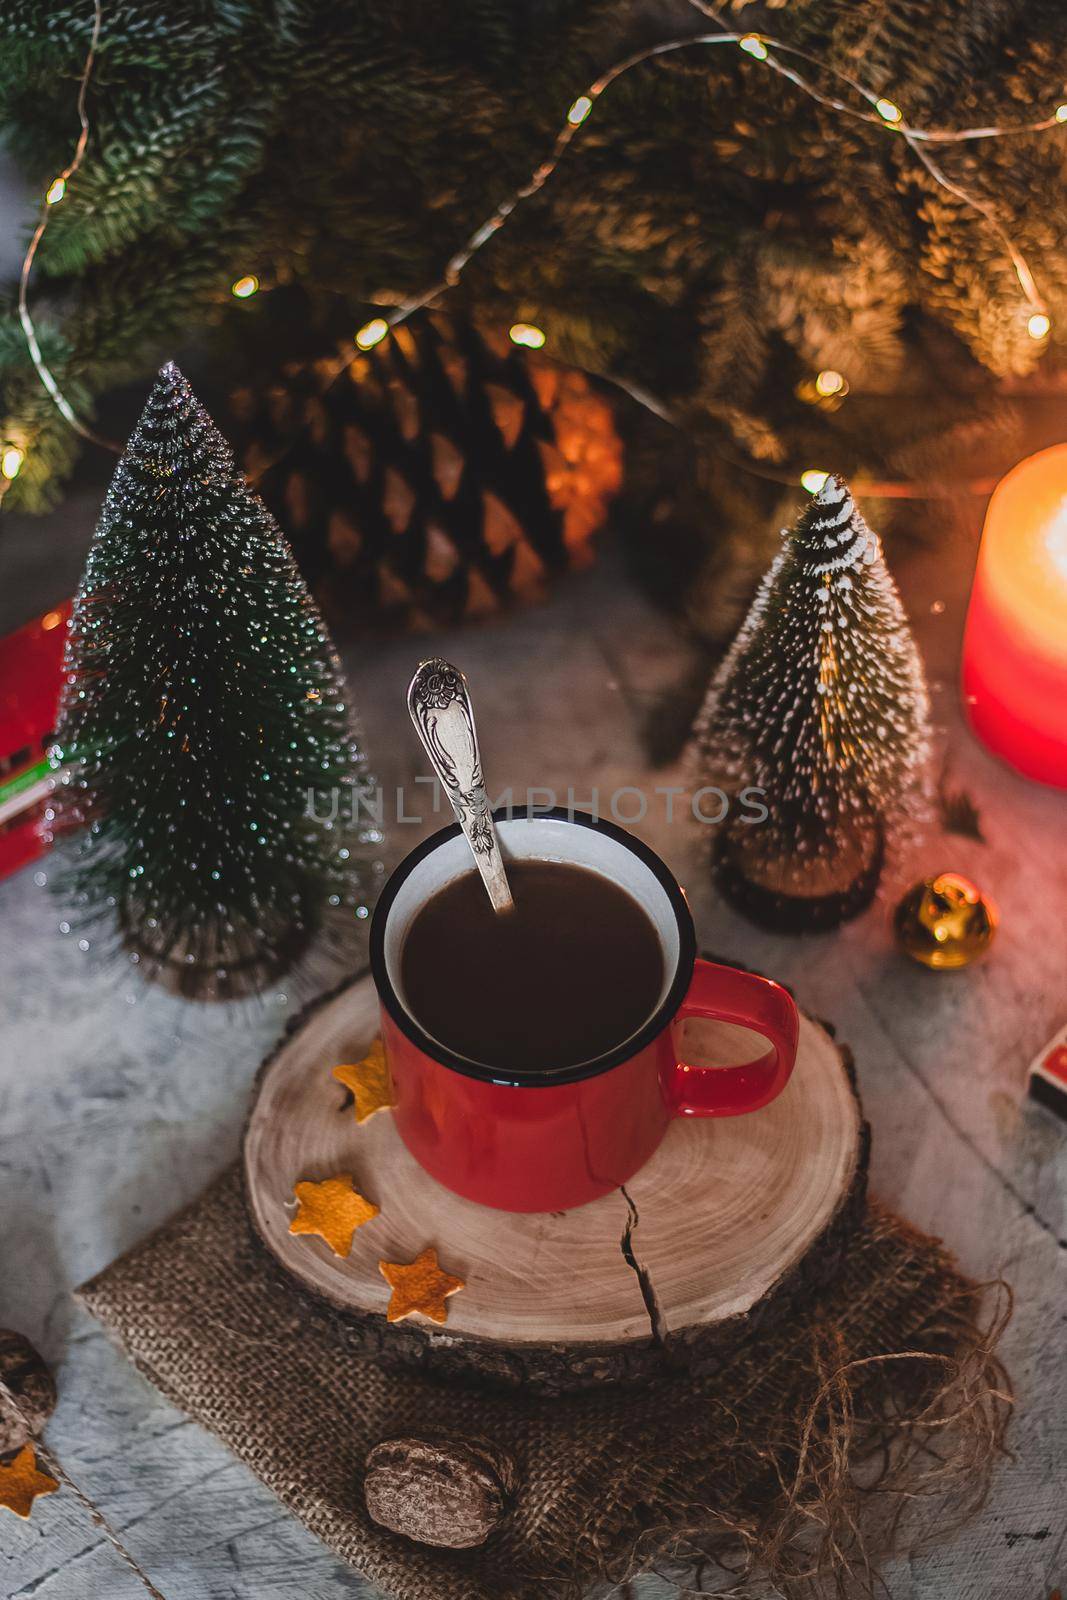 Cozy winter drink hot chocolate cocoa in red mug with fir tree, candles and Christmas lights